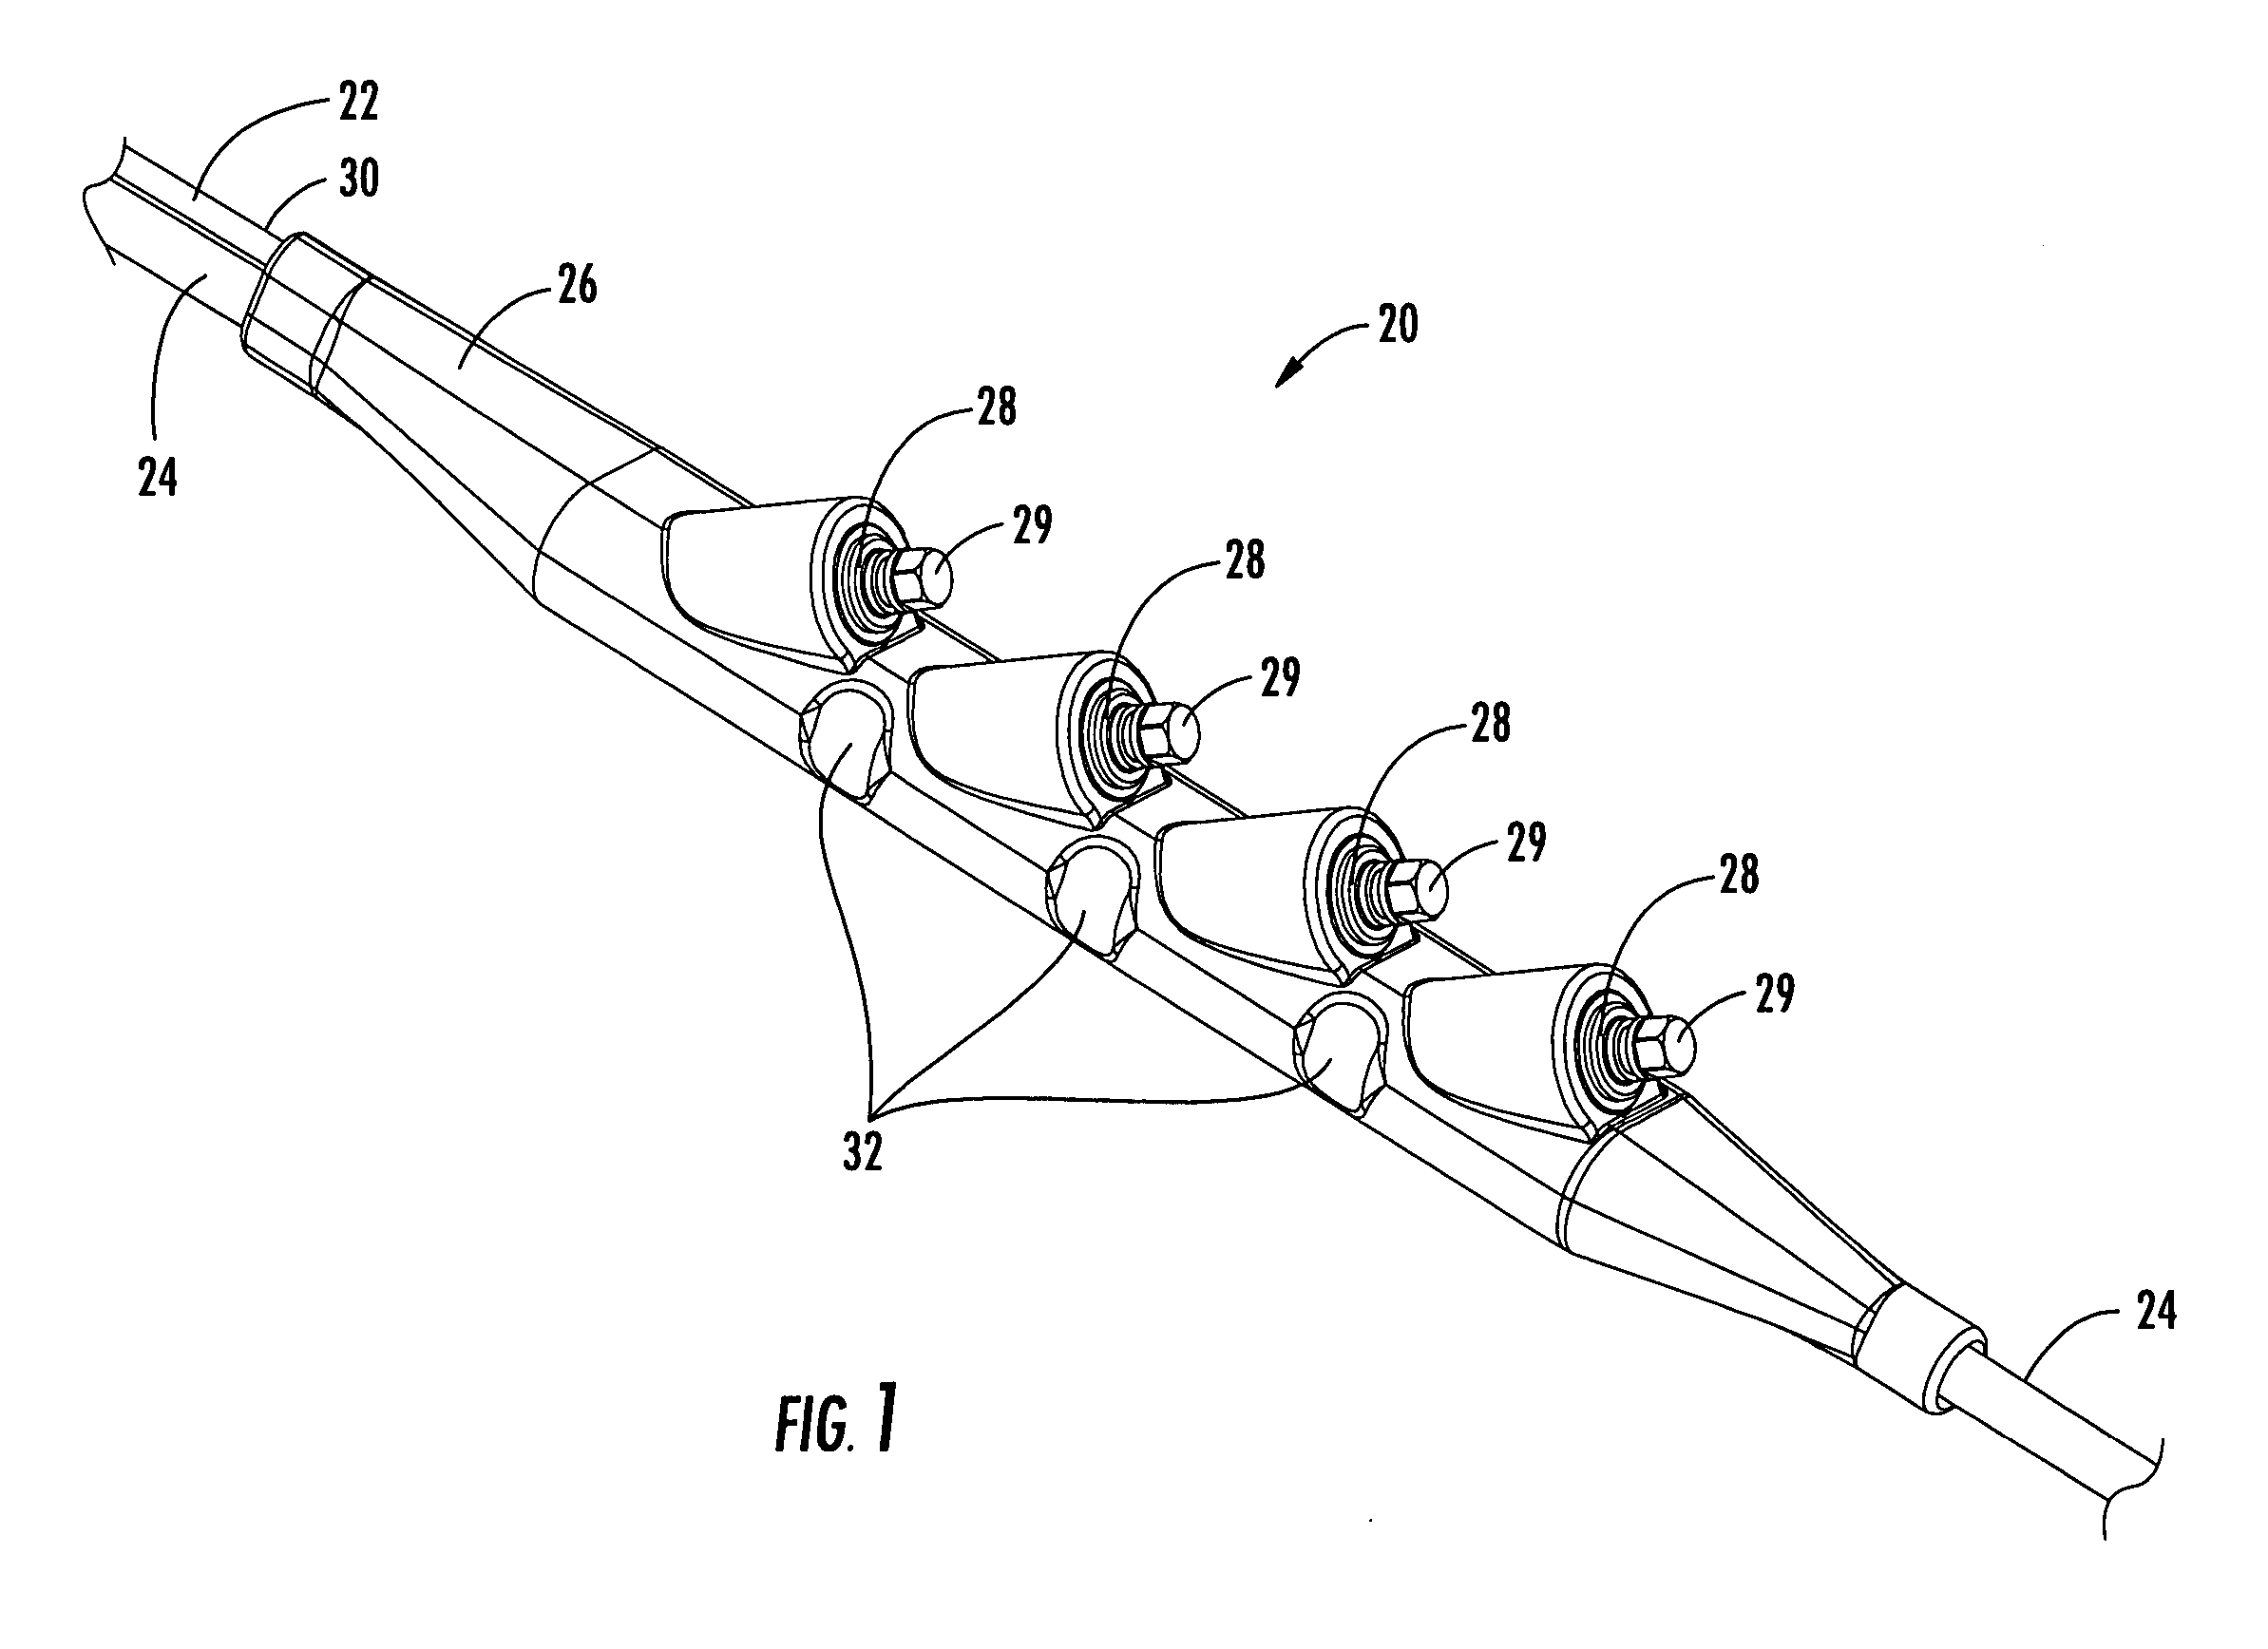 Adjustable tether assembly for fiber optic distribution cable